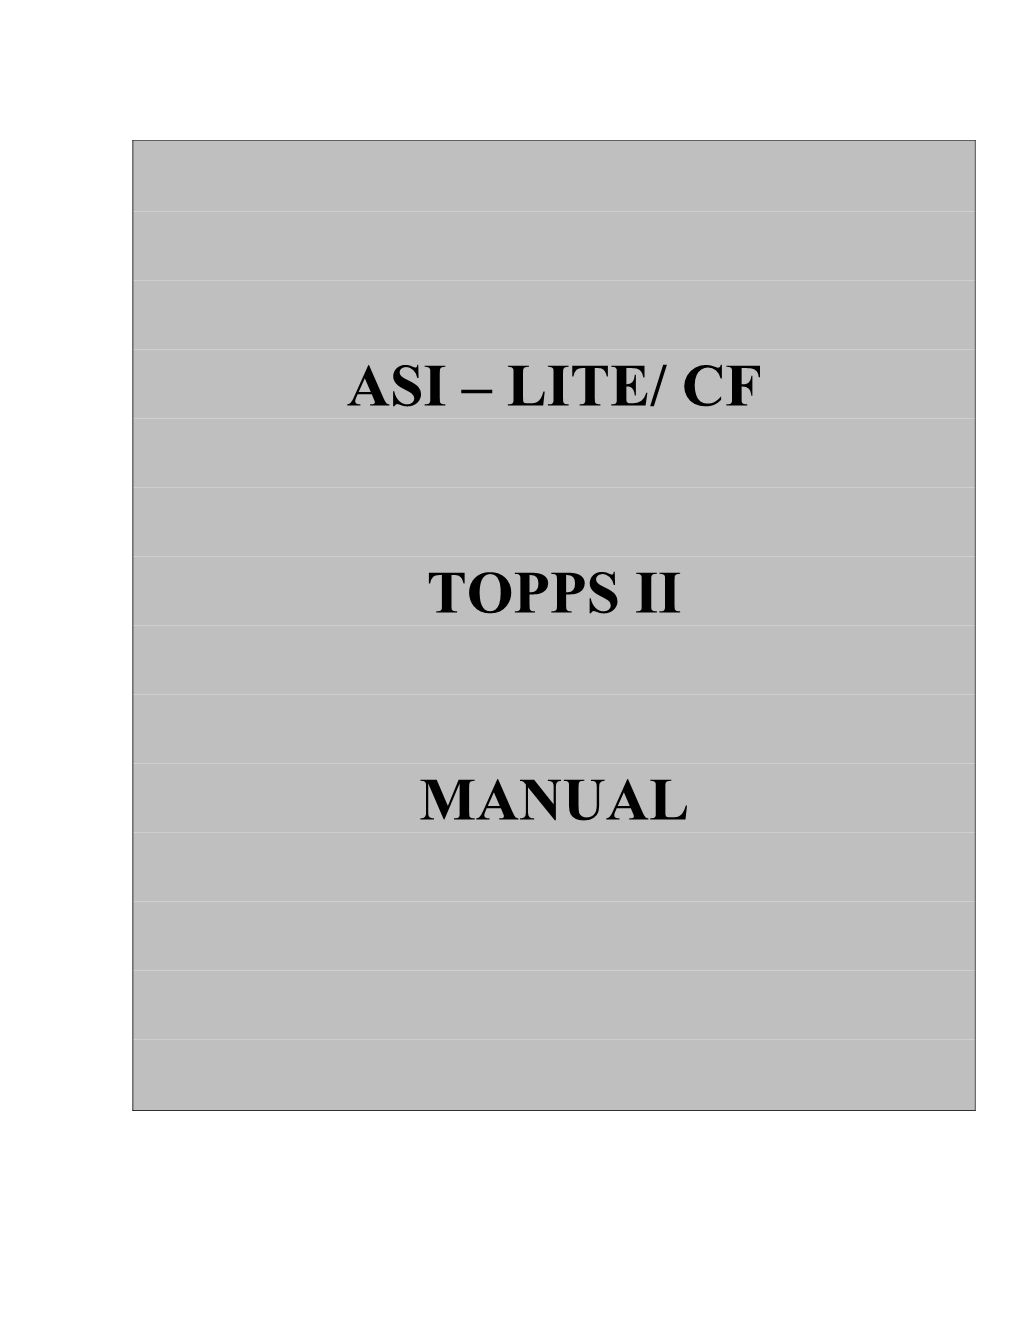 How to Use This Manual